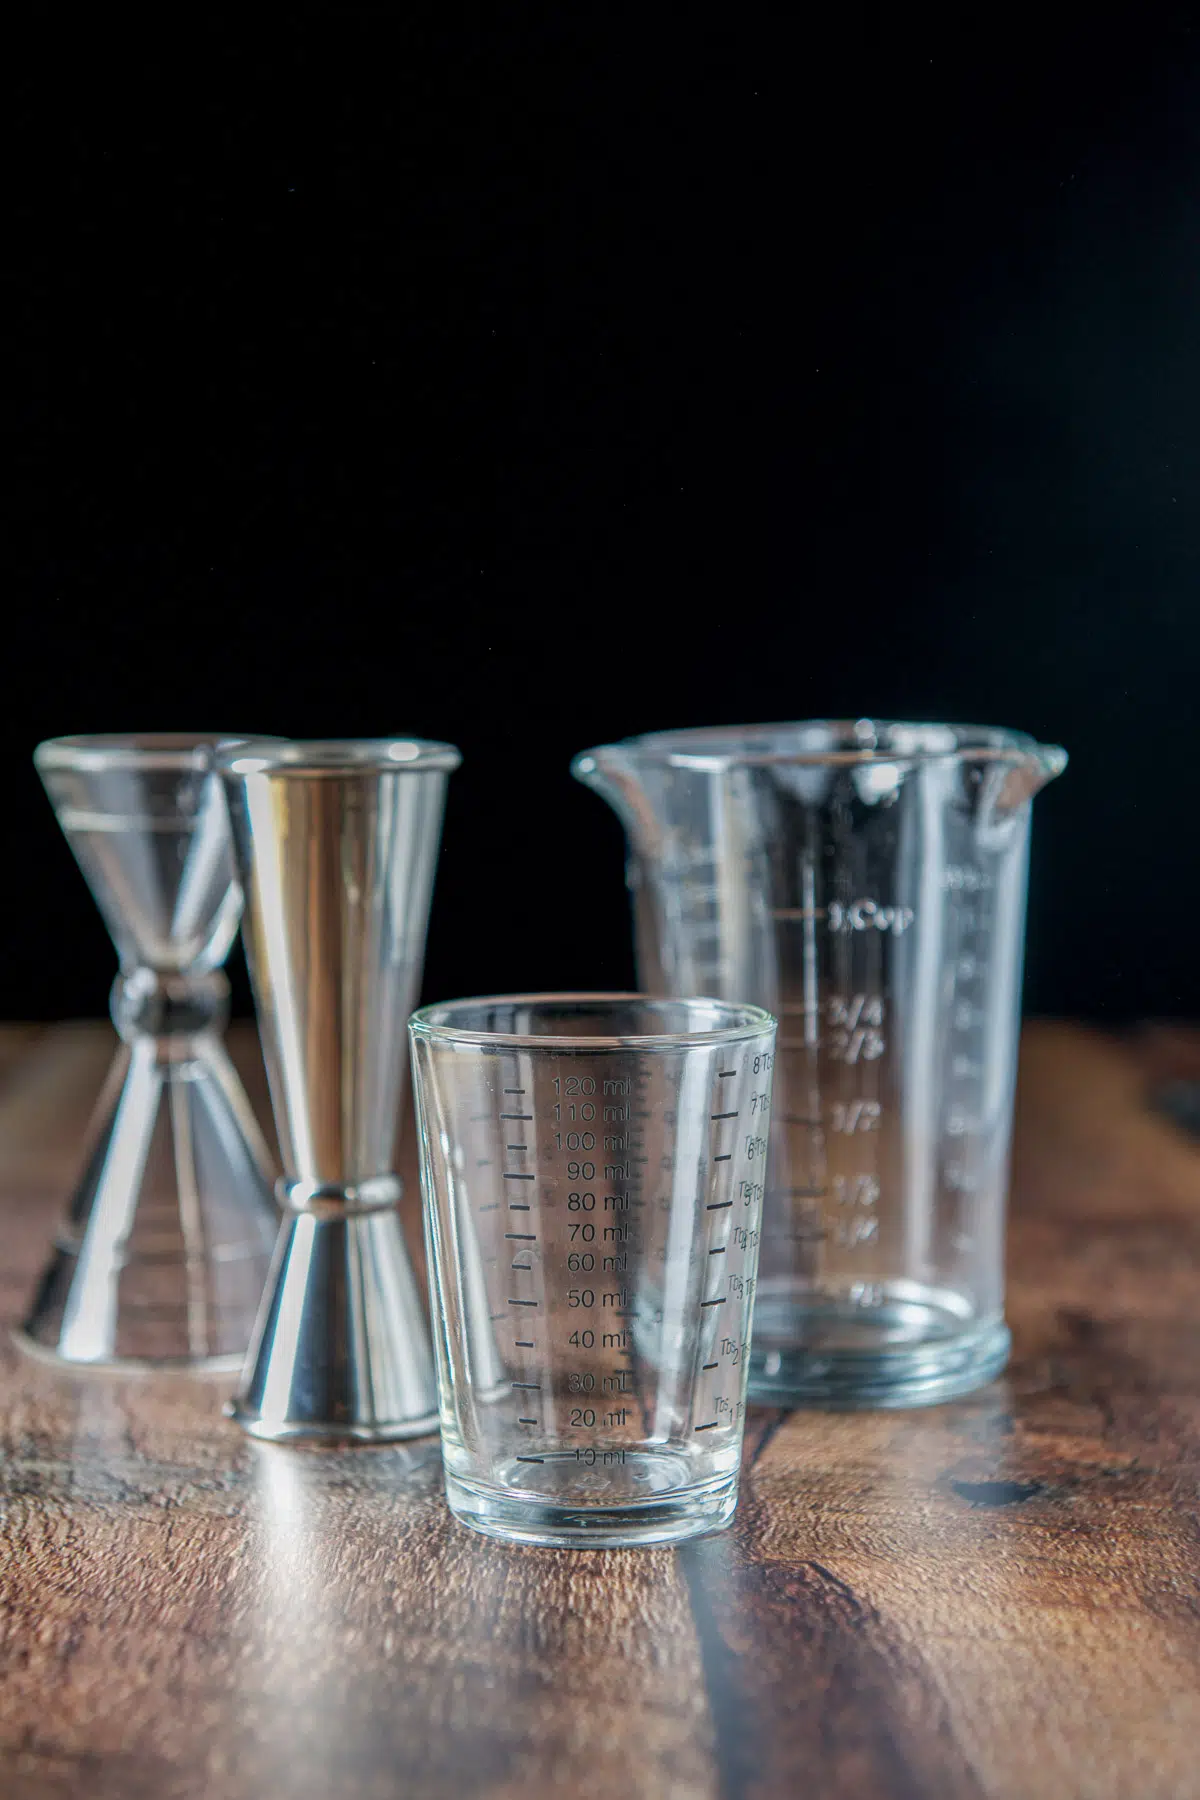 Different jiggers and measuring glasses